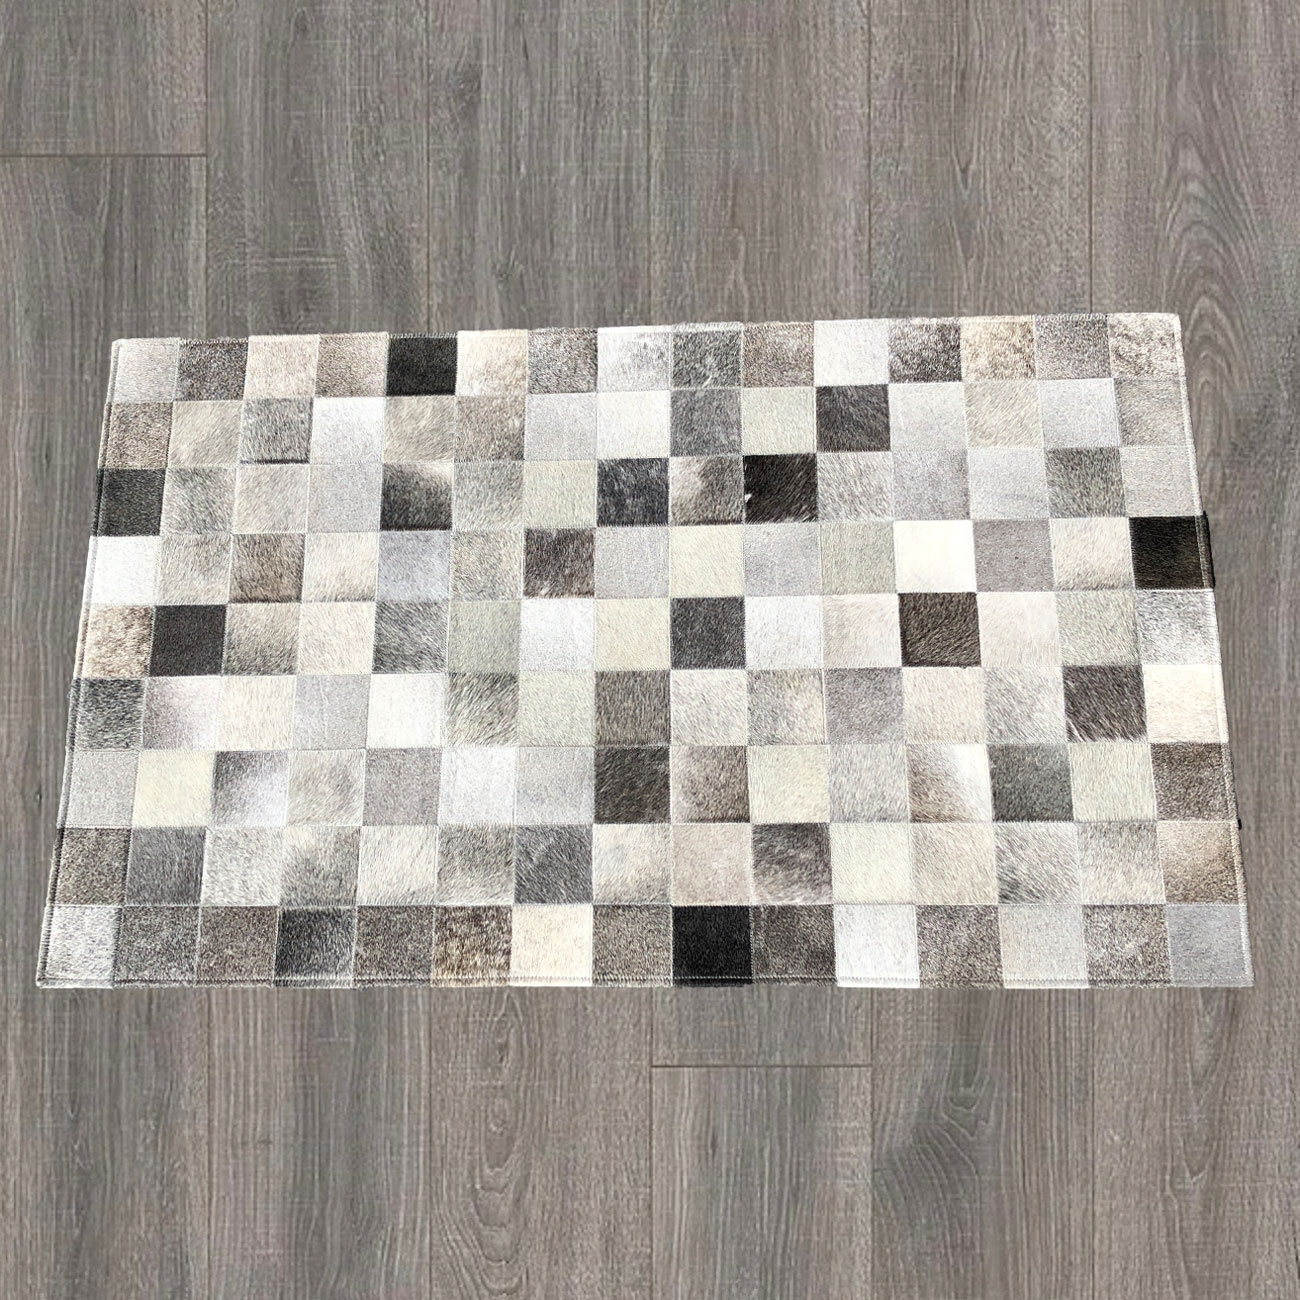 Mixed Gray Patchwork Cowhide Rug, Brazilian Cowhide Rugs Canada